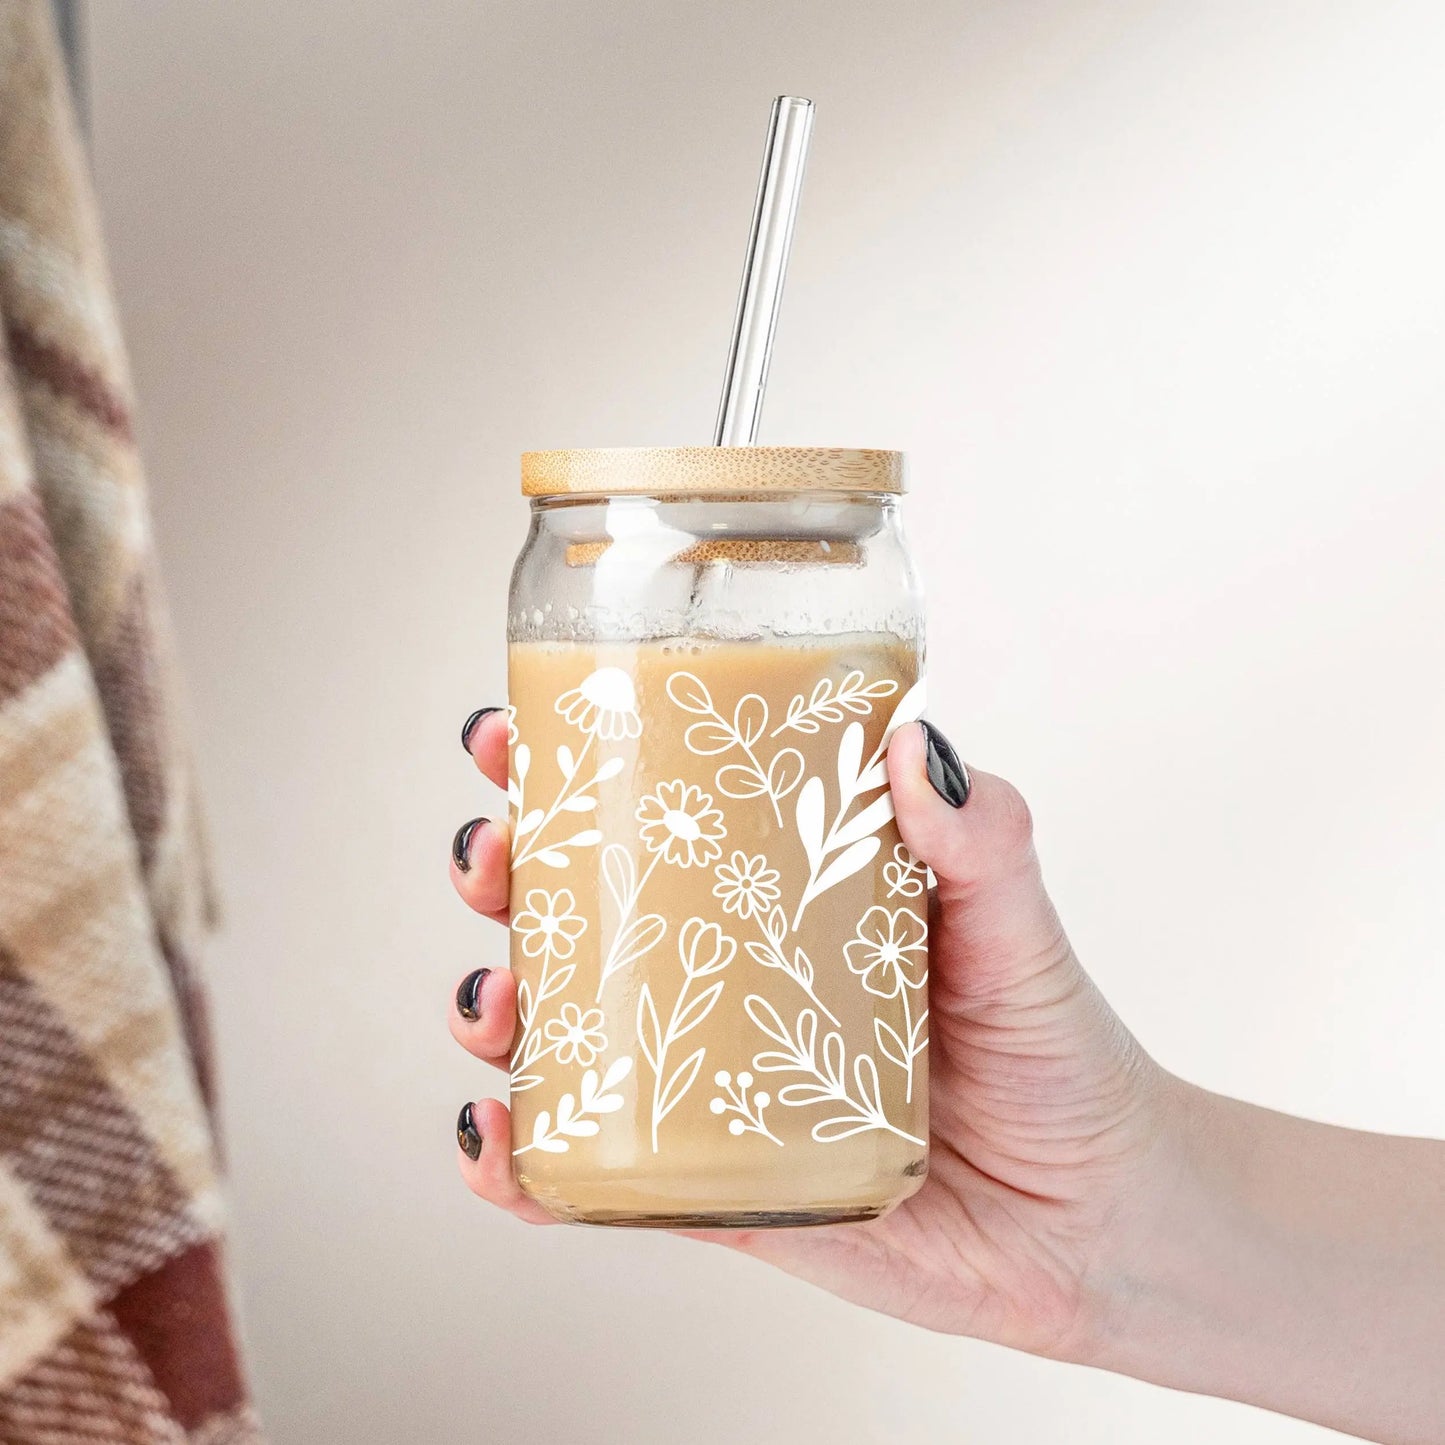 Wildflower Iced Coffee Cup with Lid & Straw, 16oz Tumbler, Cute